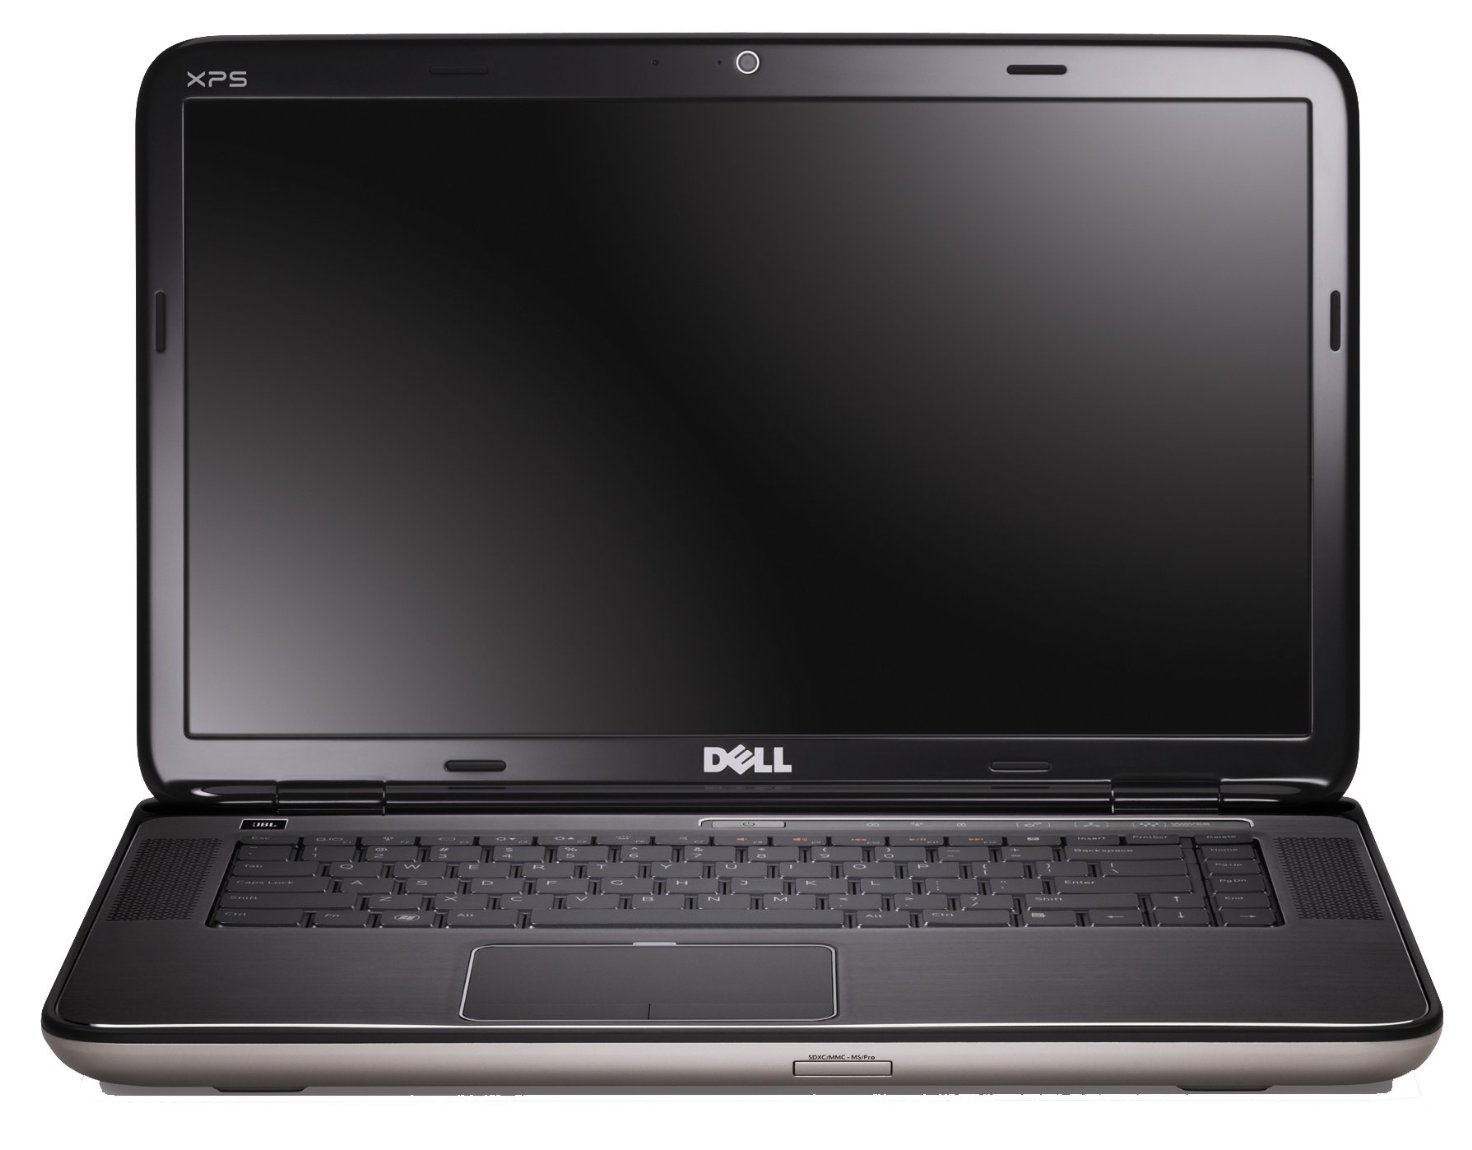  Dell XPS 15 7590-6657  #1